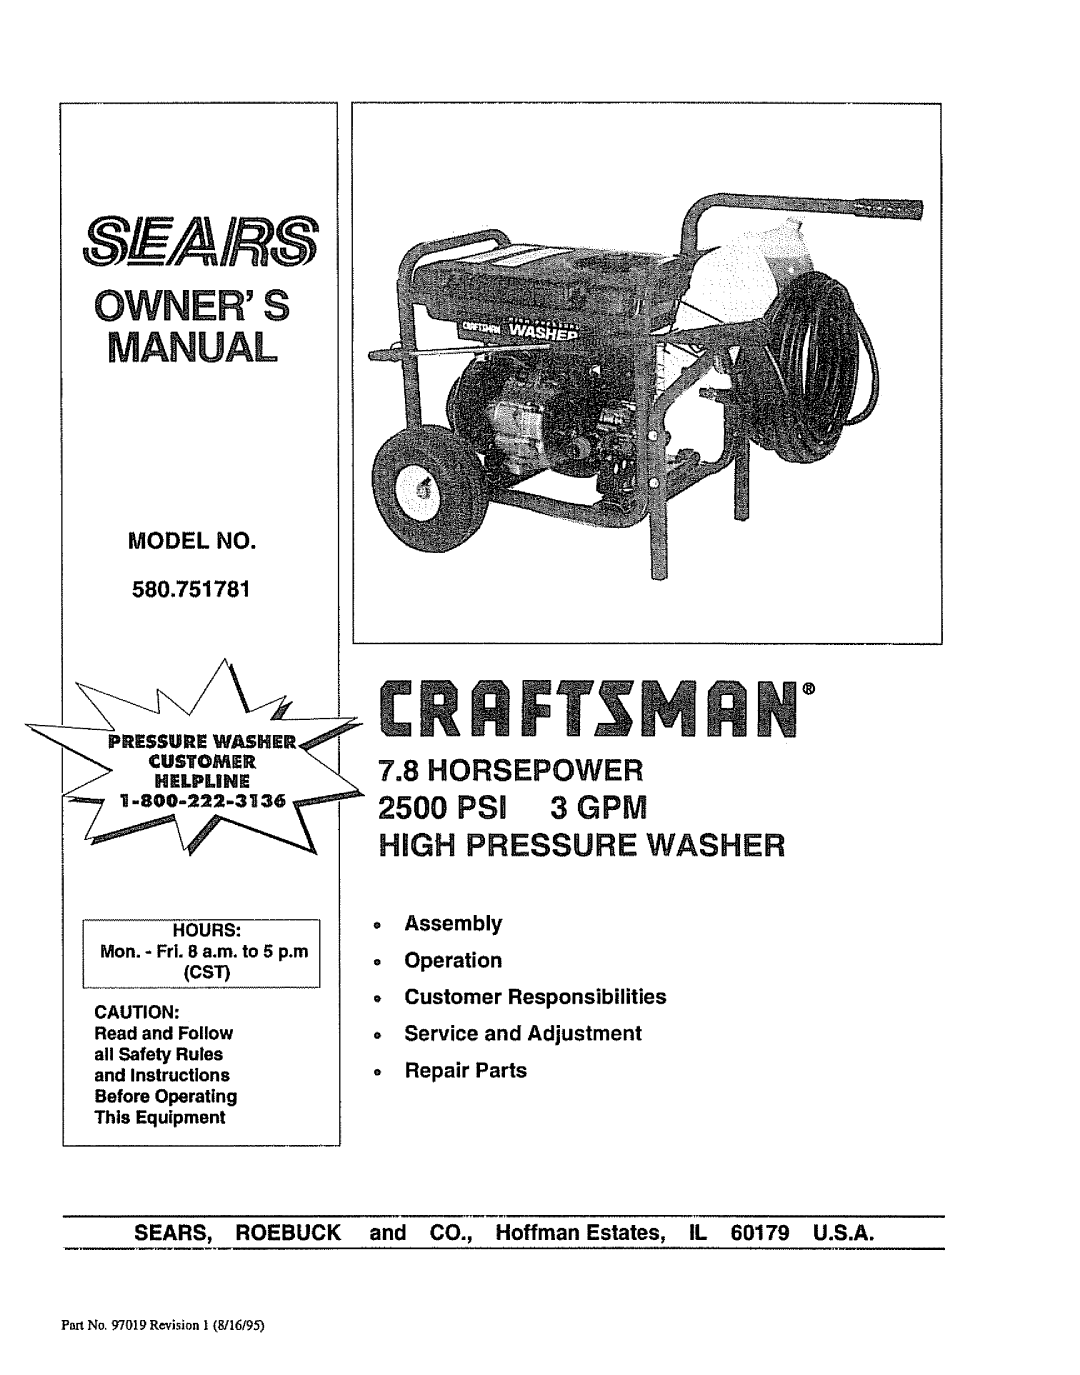 Craftsman 580.751781 owner manual 7.8HORSEPOWER, HiGH PRESSURE WASHER, Model No, Assembly, Operation, Service, Repair 